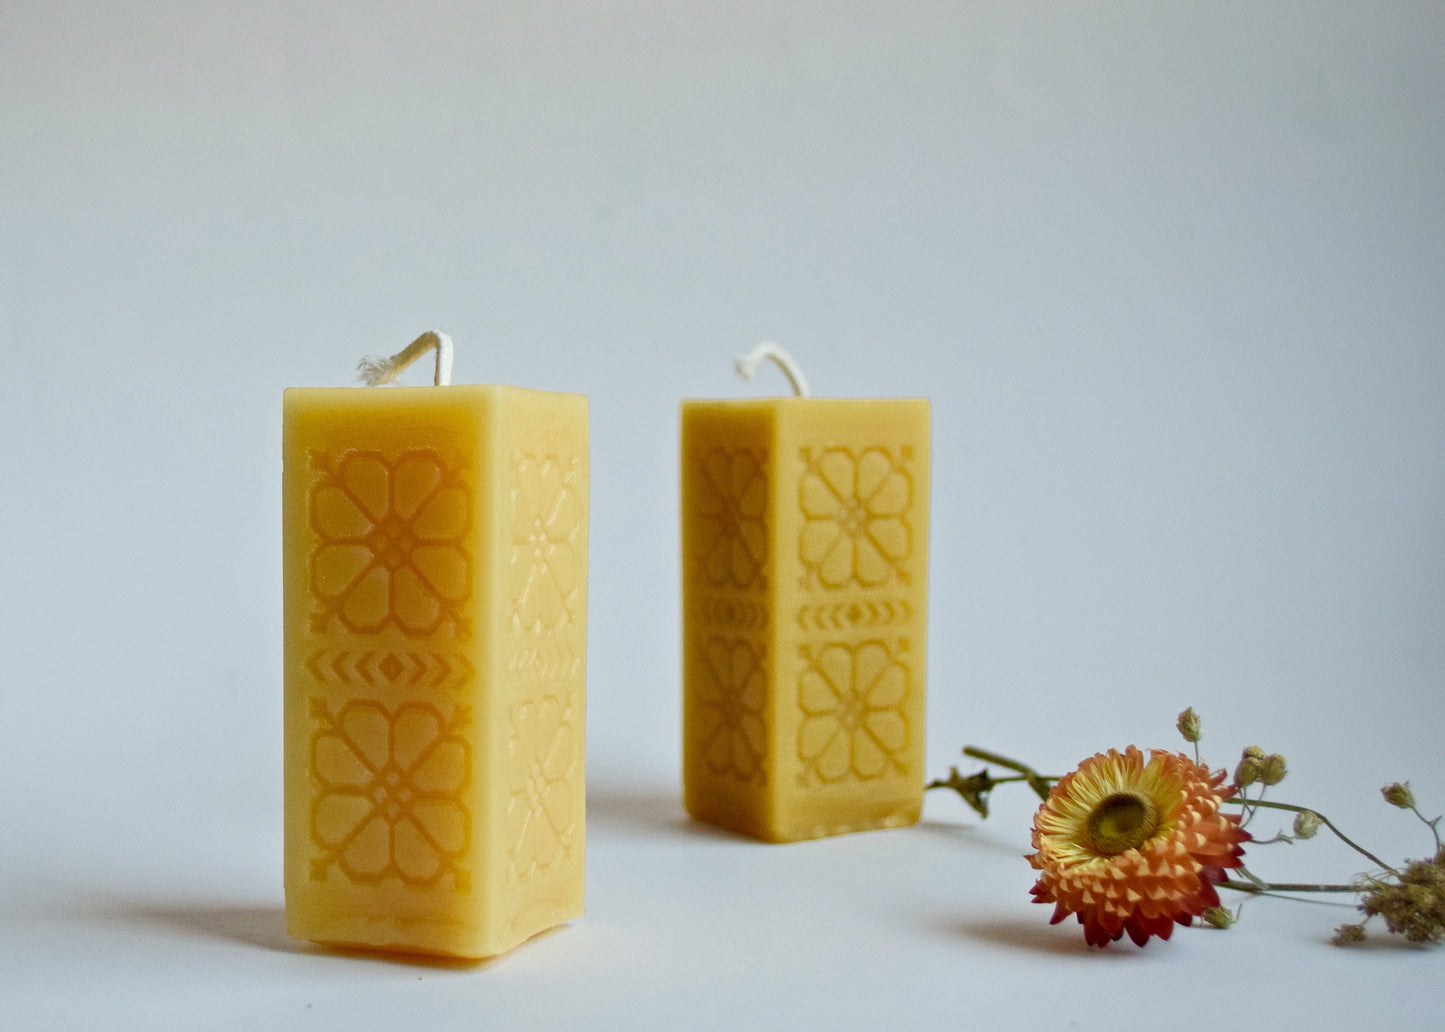 Square Sun Flower Pilllar -  Beeswax Candle // Beeswax Candle, Candle, Beeswax, Pillar Candle, Eco Friendly, Non Toxic